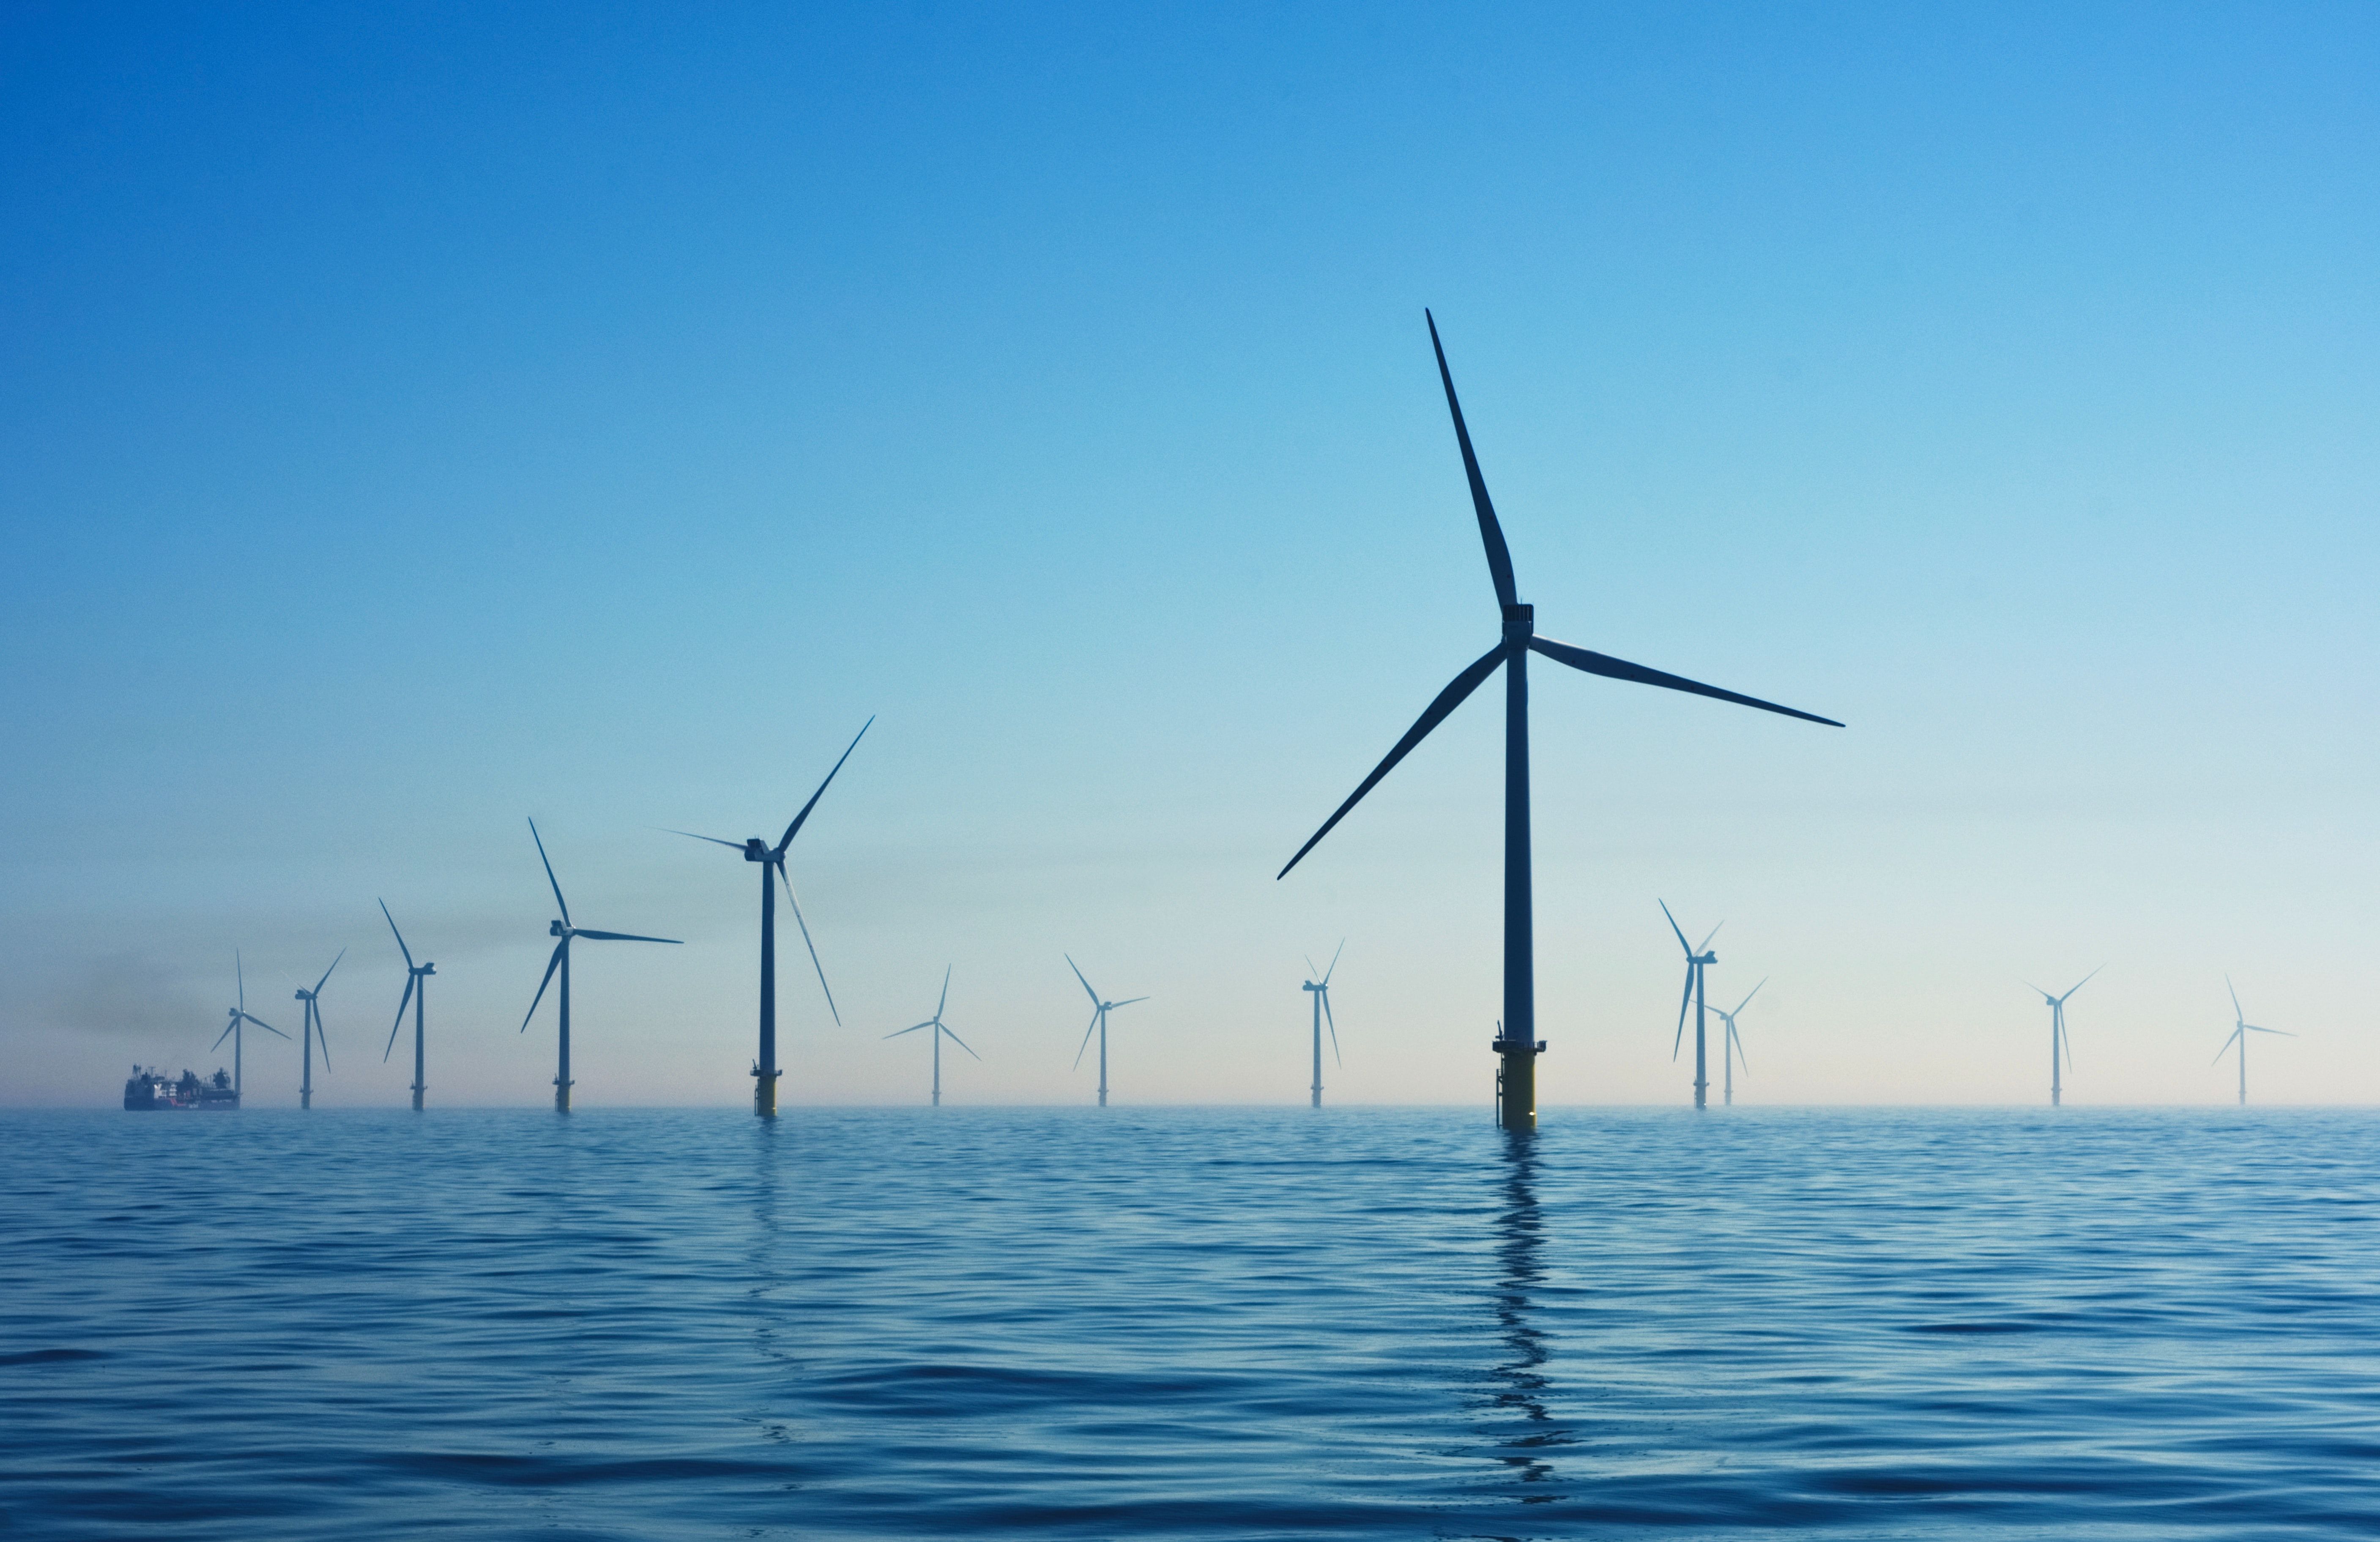 New York's First Offshore Wind Farm Approved by BOEM